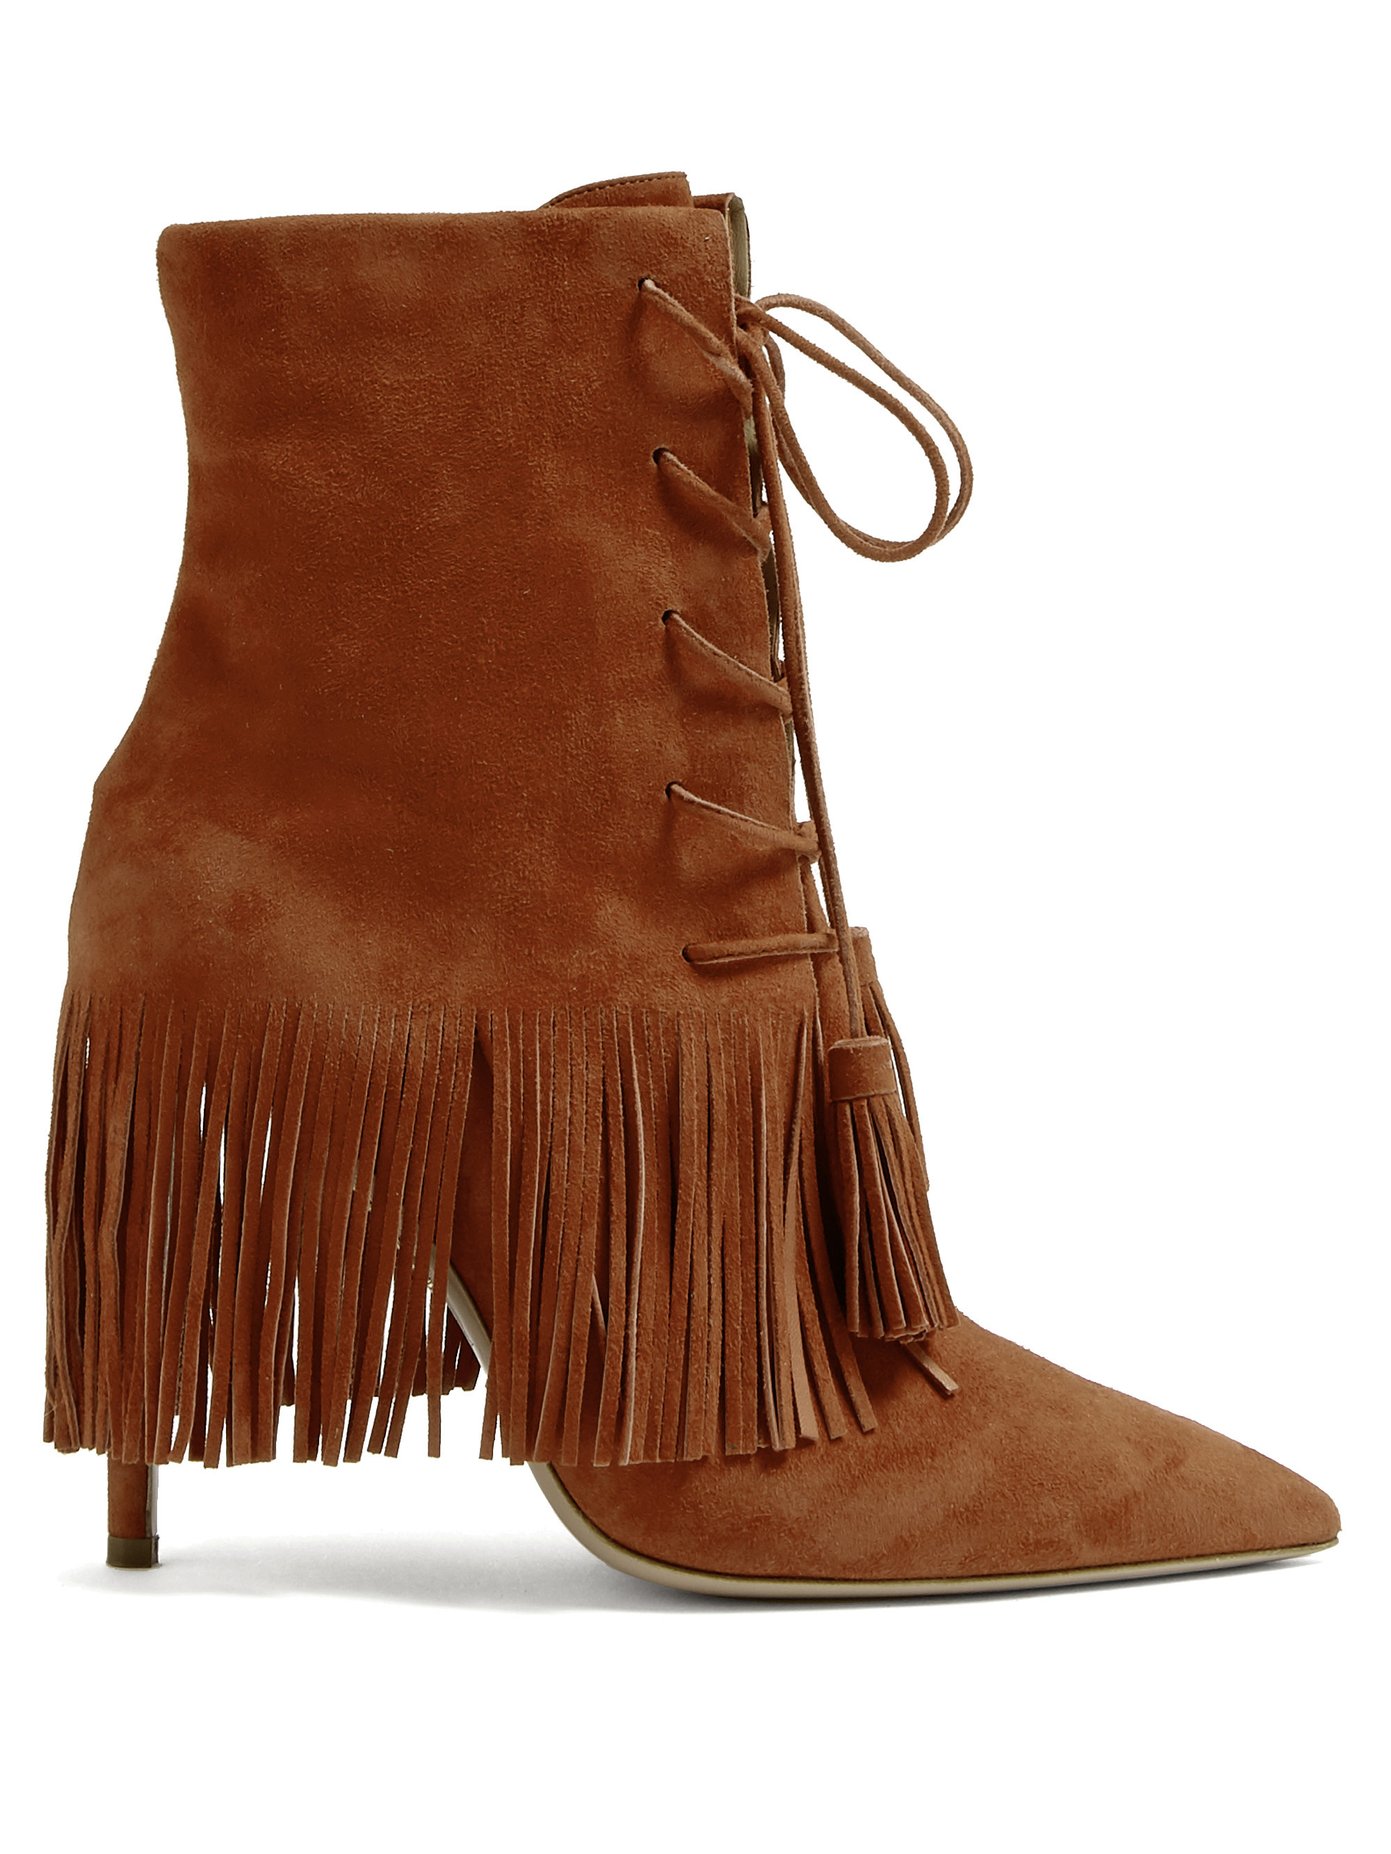 faux suede sock boots